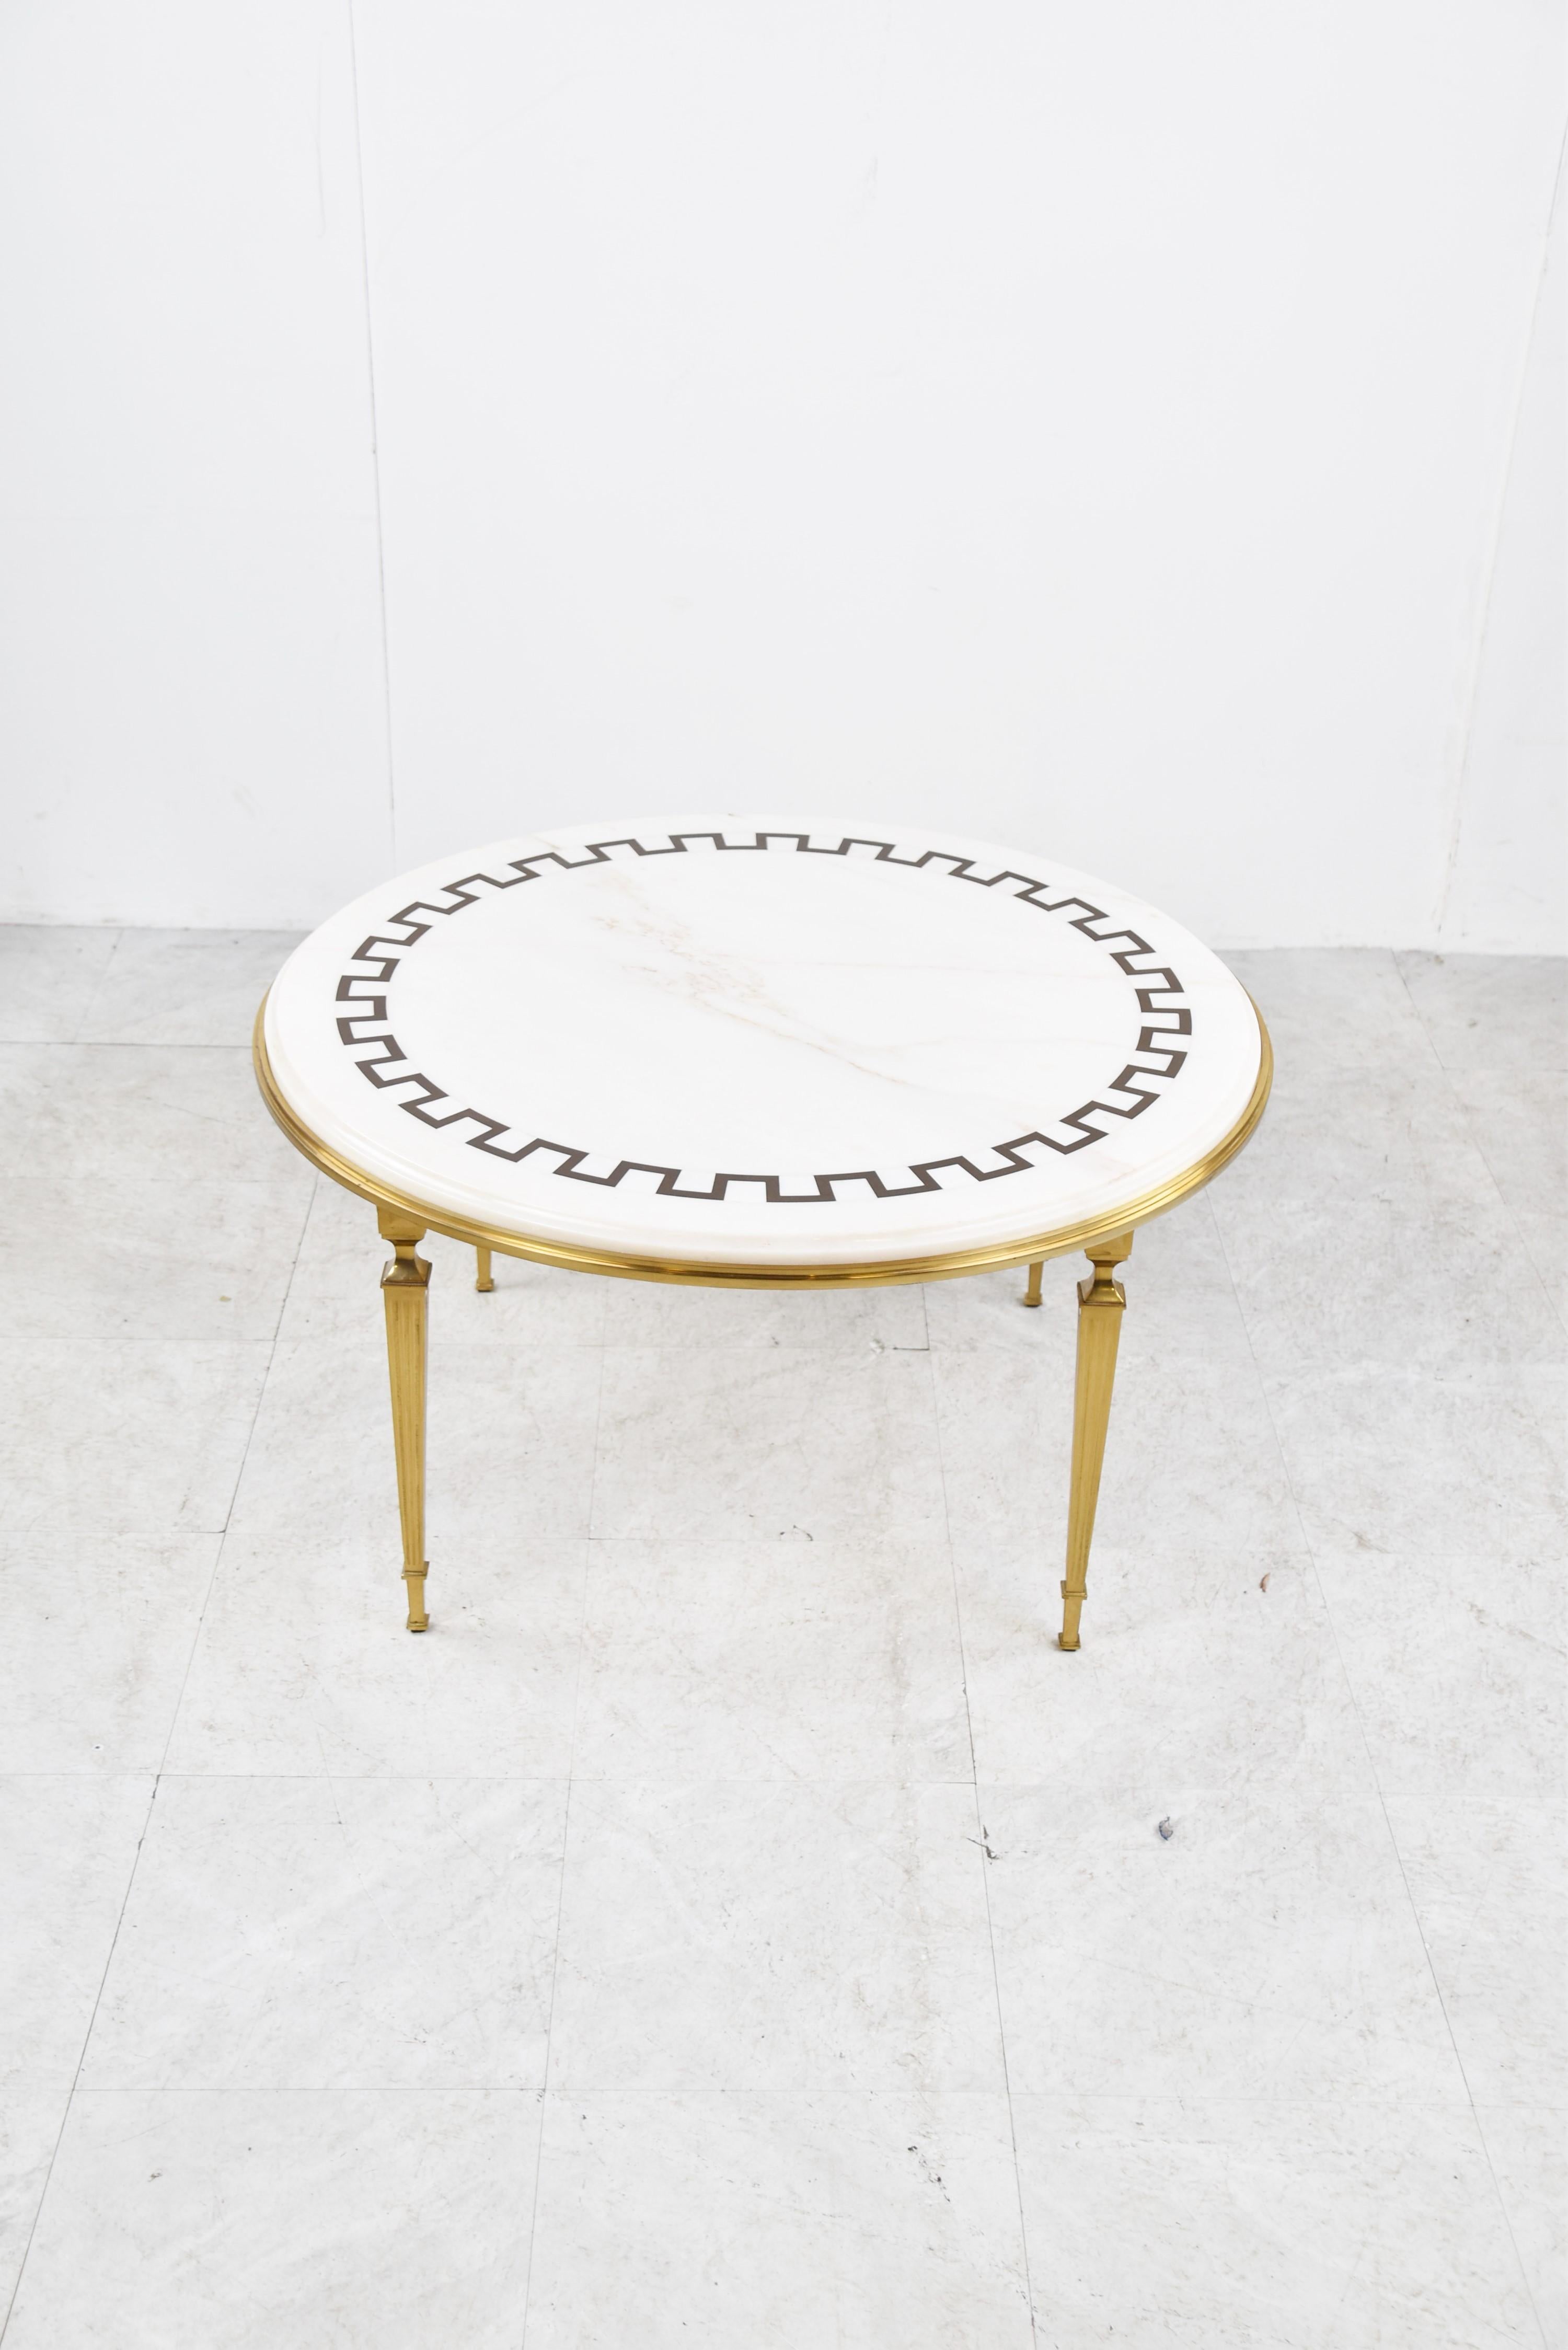 Neoclassical Vintage Brass and White Marble Coffee Table, 1970s For Sale